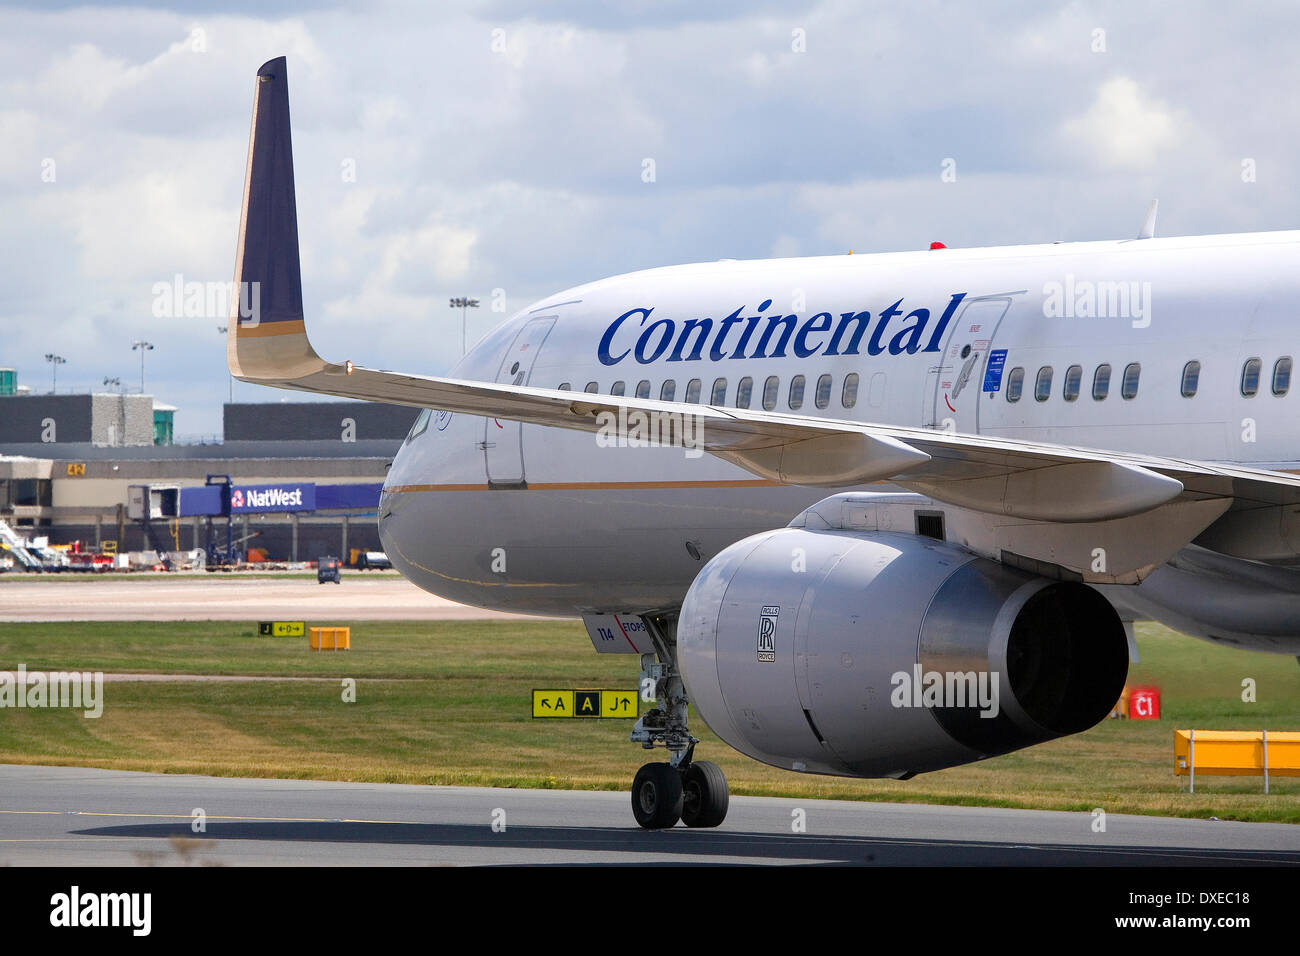 Continental Airlines boeing757 Taxi-Ing Manchester Airport nach der Landung. Stockfoto